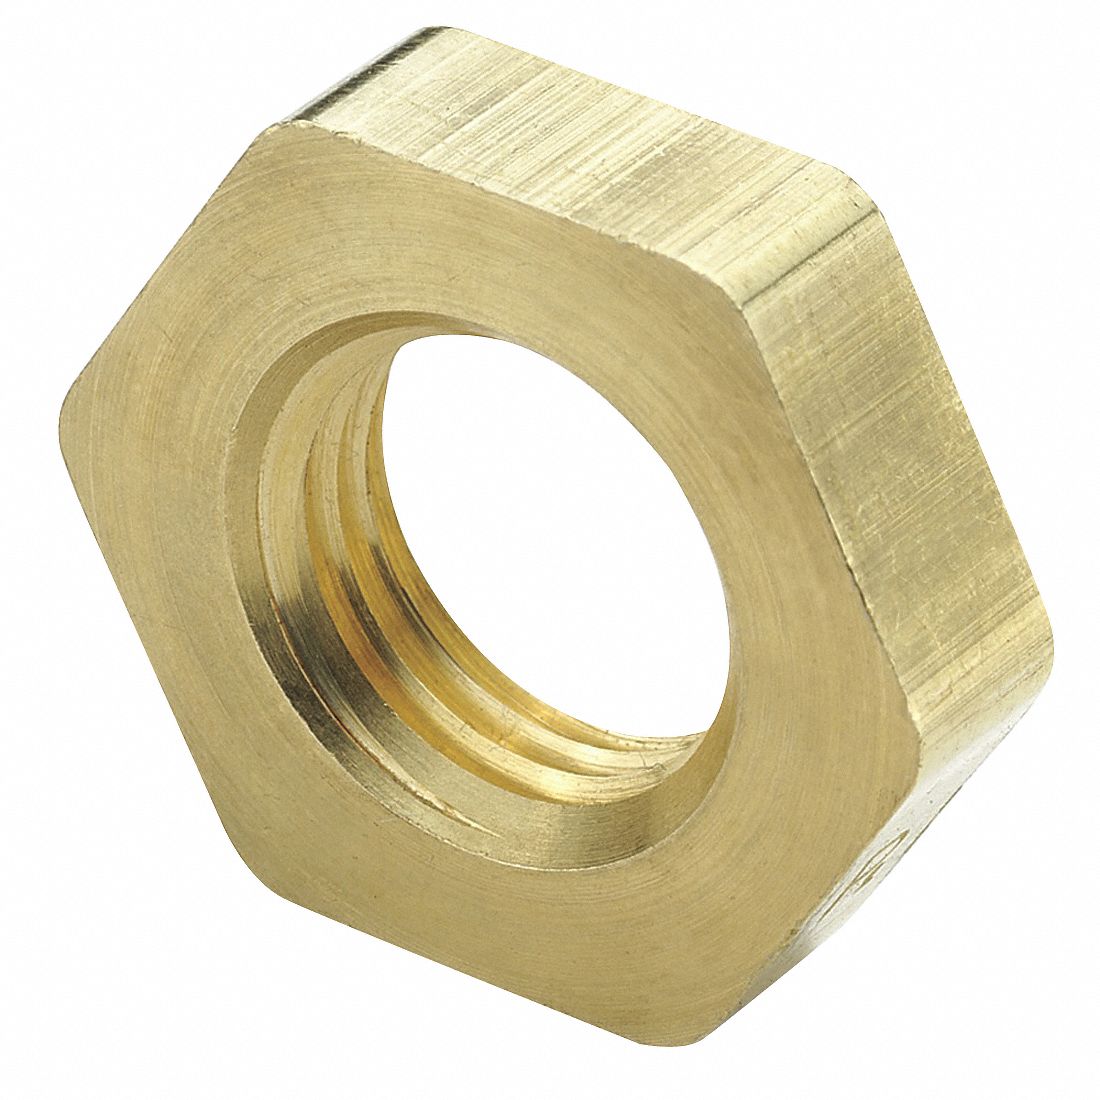 Locknut: Brass, 1/4 in Fitting Pipe Size, Female NPT, 1/4 in Overall Lg